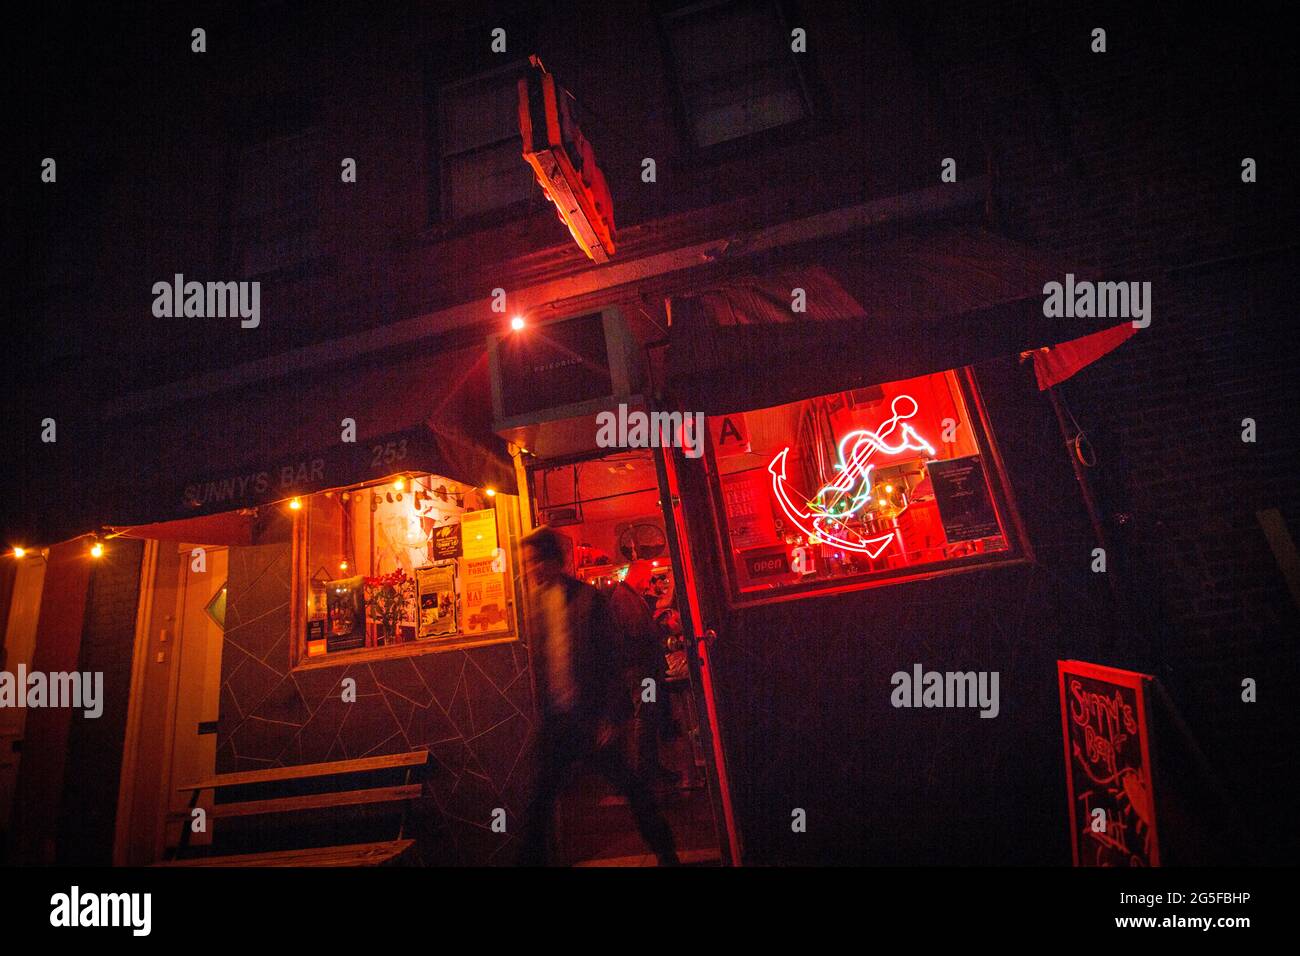 Sunny's Bar in Red Hook, Brooklyn. The old school, working class bar has kept its charm throughout the years Antonio "Sunny" Balzano and his wife Tone Johansen have been running it. The bar and its owners have weathered storms and economic downturns in the once remote neighborhood of Brooklyn. Sunny passed away in 2016, but Tone keeps the doors open, with concerts and live events for the patrons of the bar. Stock Photo